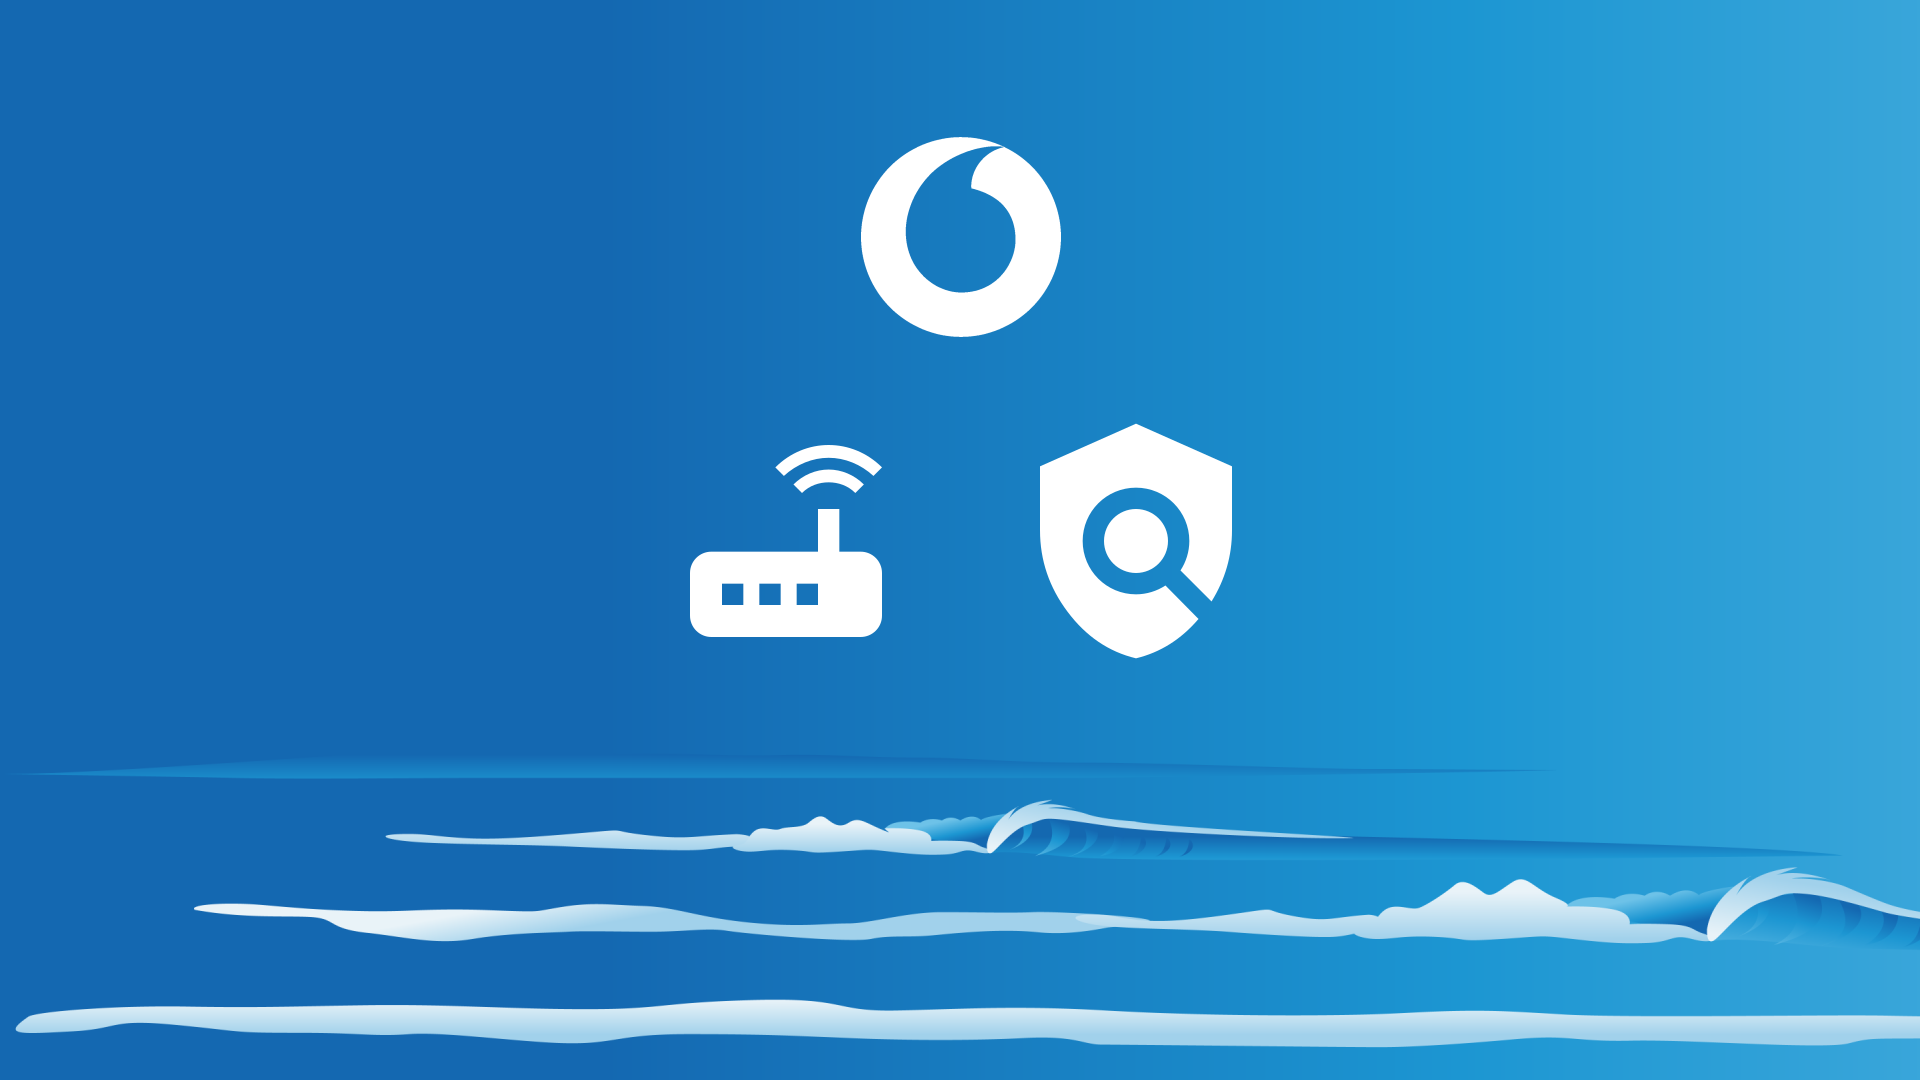 Sea background with Vodafone NZ logo and wireless router icon